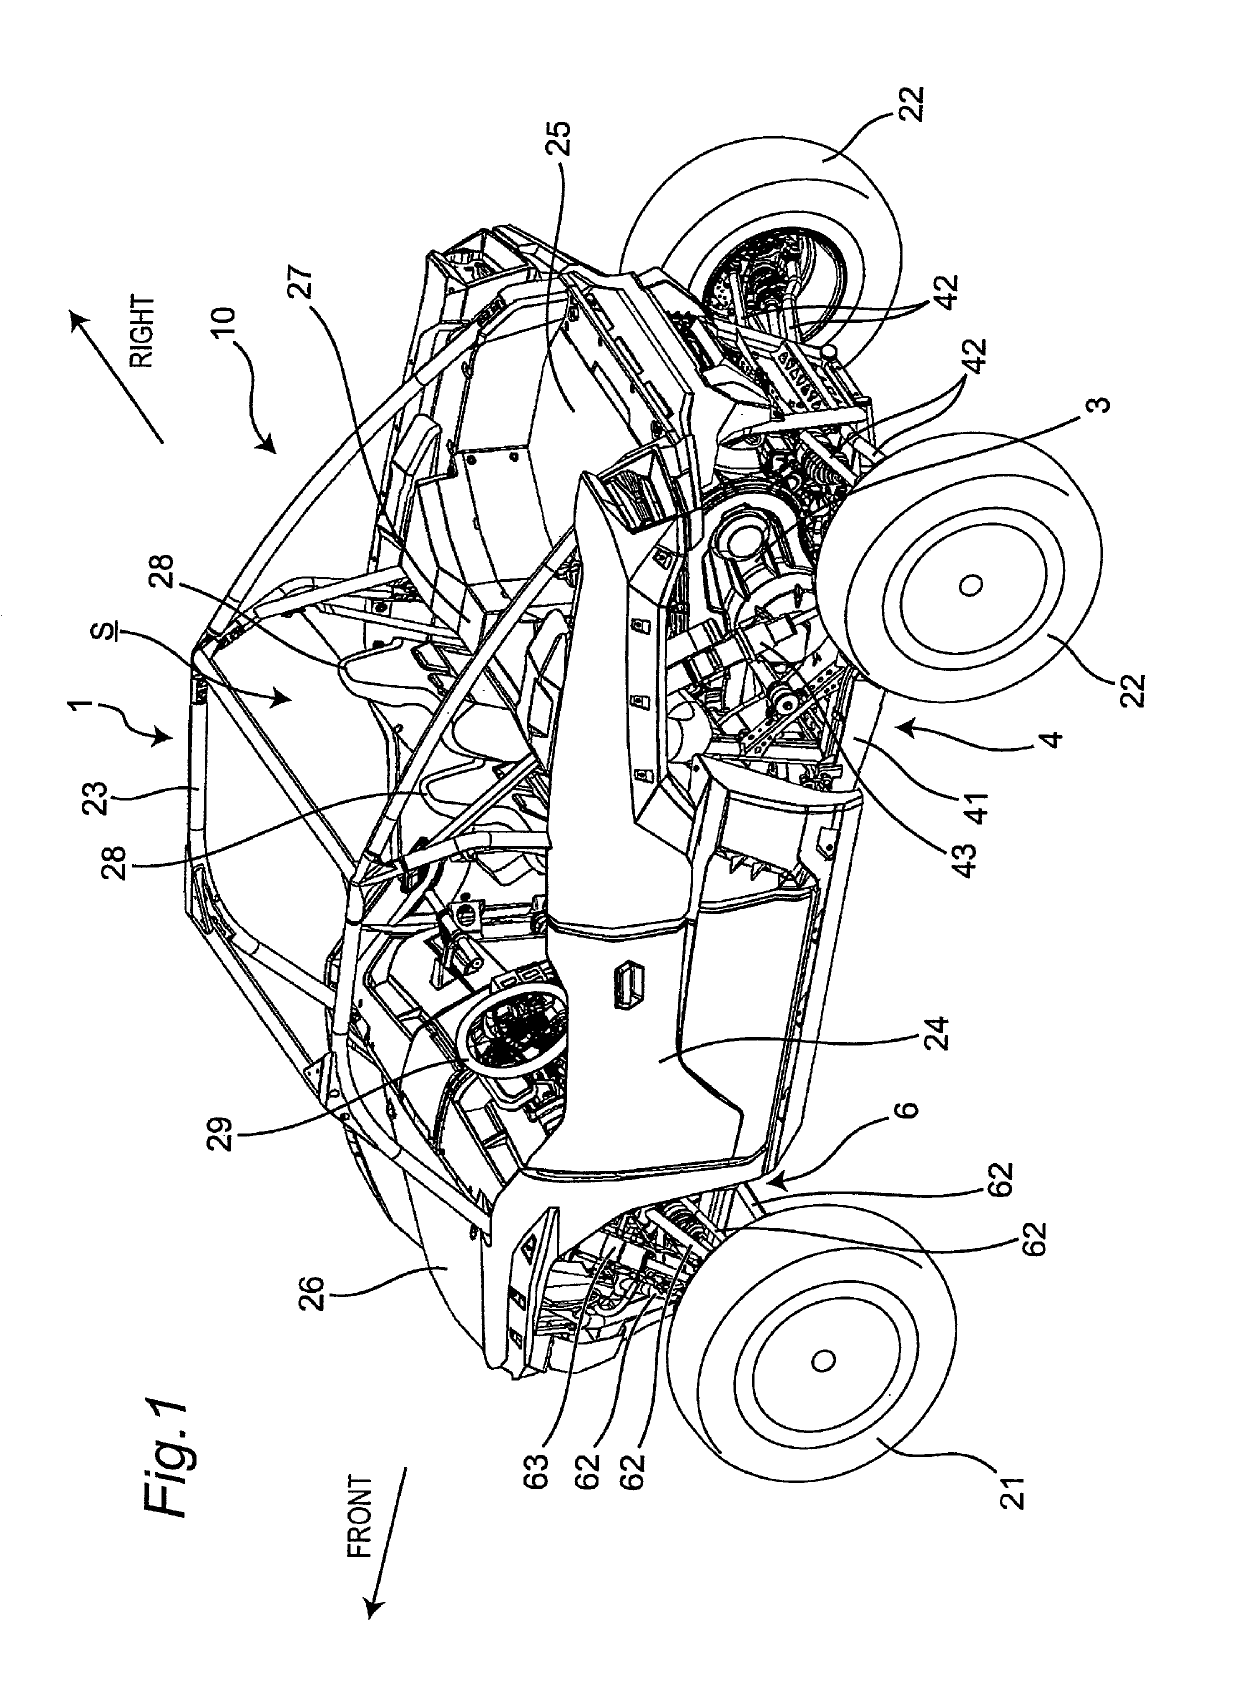 Mounting structure for power unit of utility vehicle